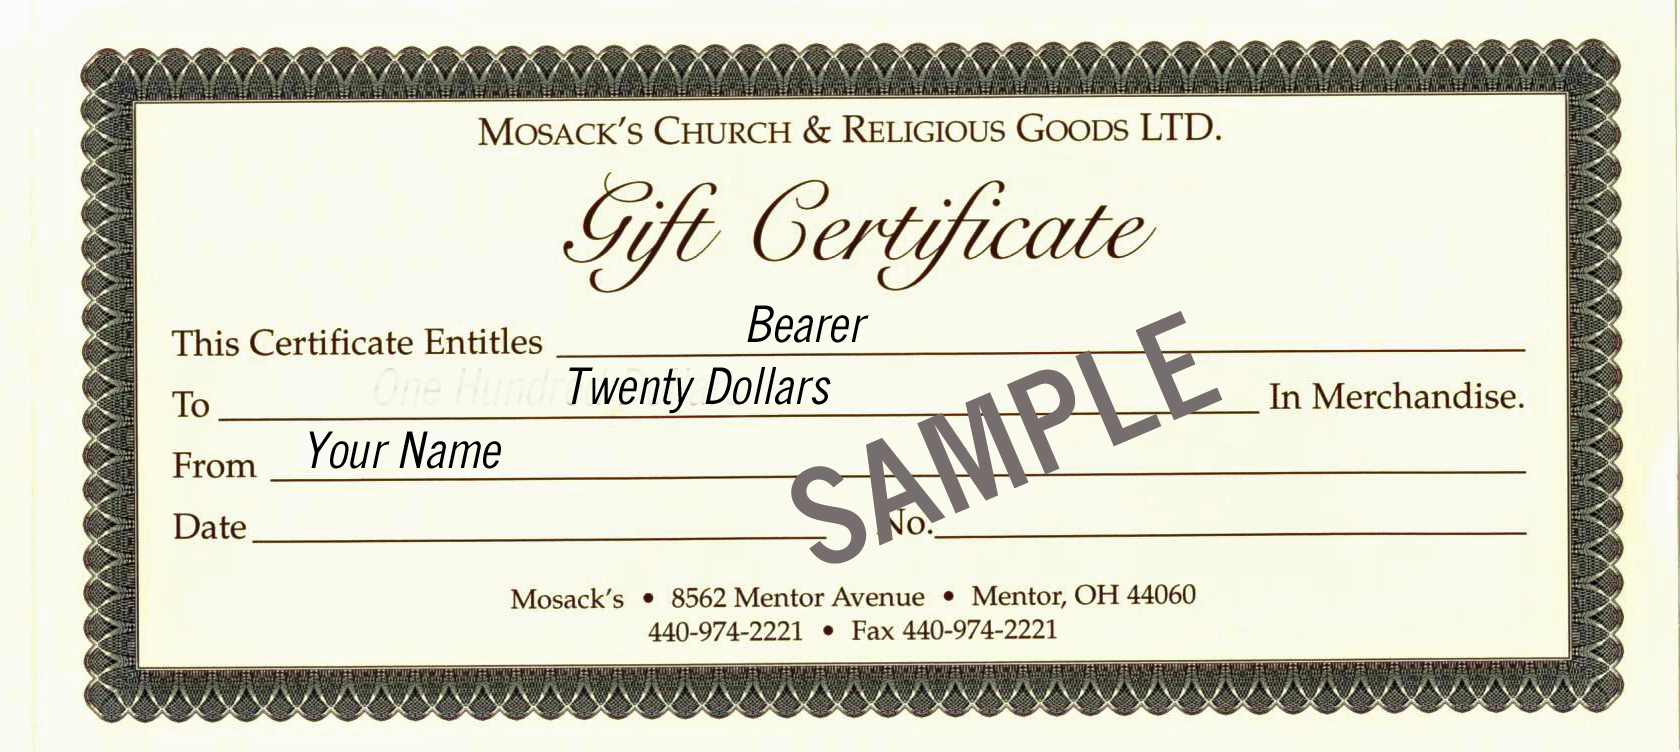 MOSACK'S $20 Gift Certificate